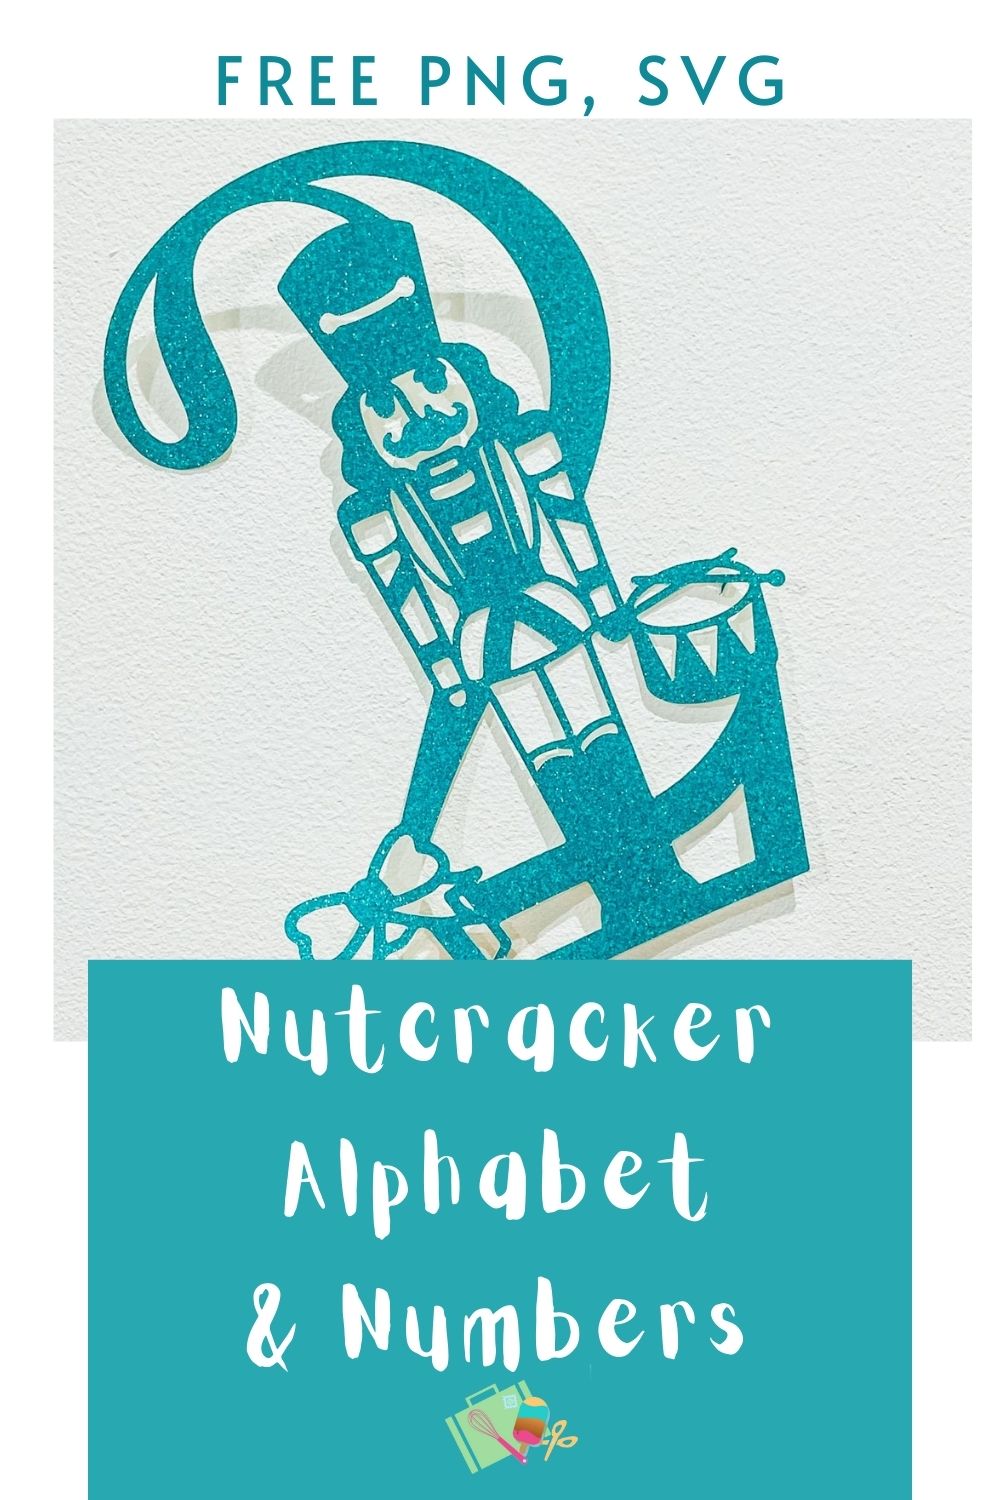 Free Nutcracker Alphabet letters and numbers for holiday crafting and card making